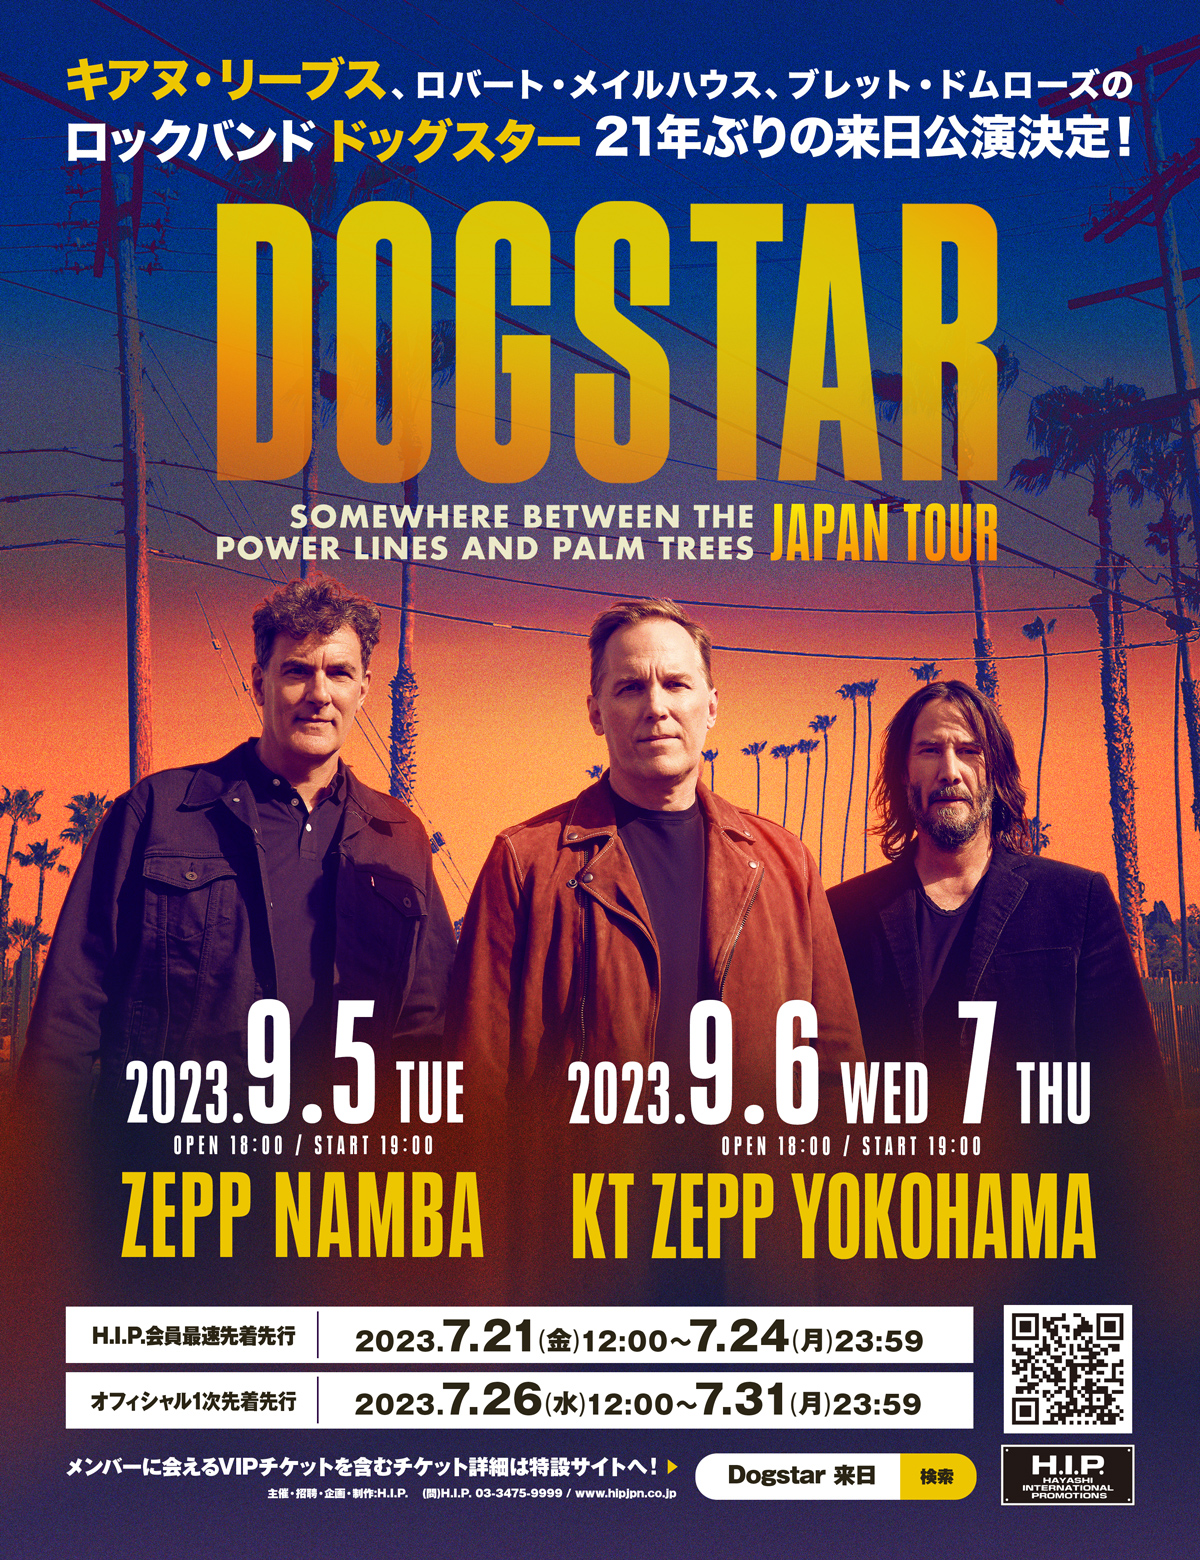 Dogstar「SOMEWHERE BETWEEN THE POWER LINES AND PALM TREES Japan Tour 2023」